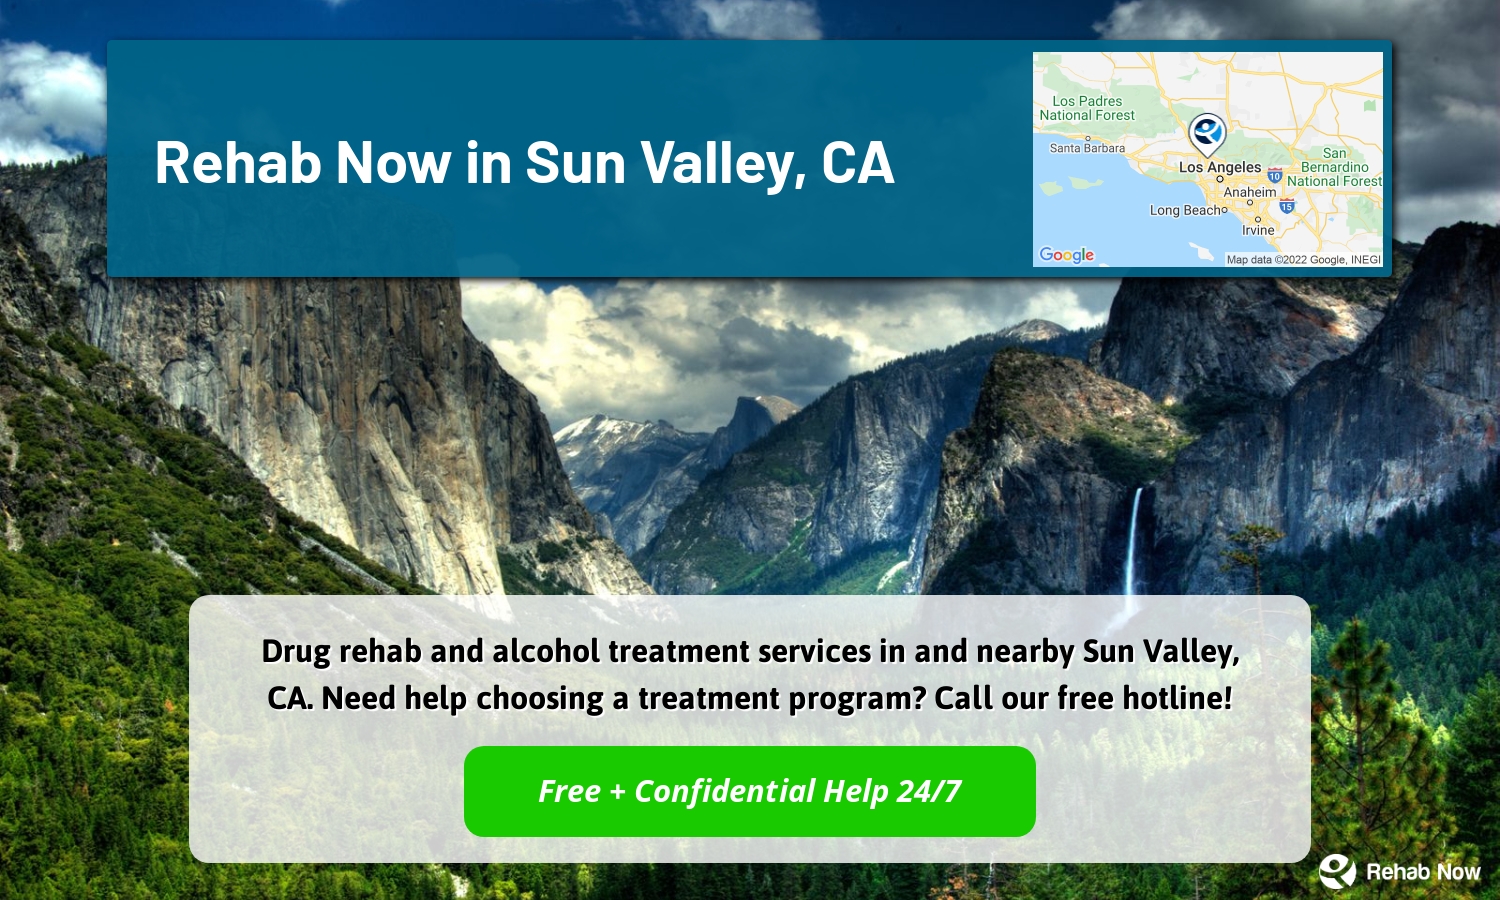 Drug rehab and alcohol treatment services in and nearby Sun Valley, CA. Need help choosing a treatment program? Call our free hotline!